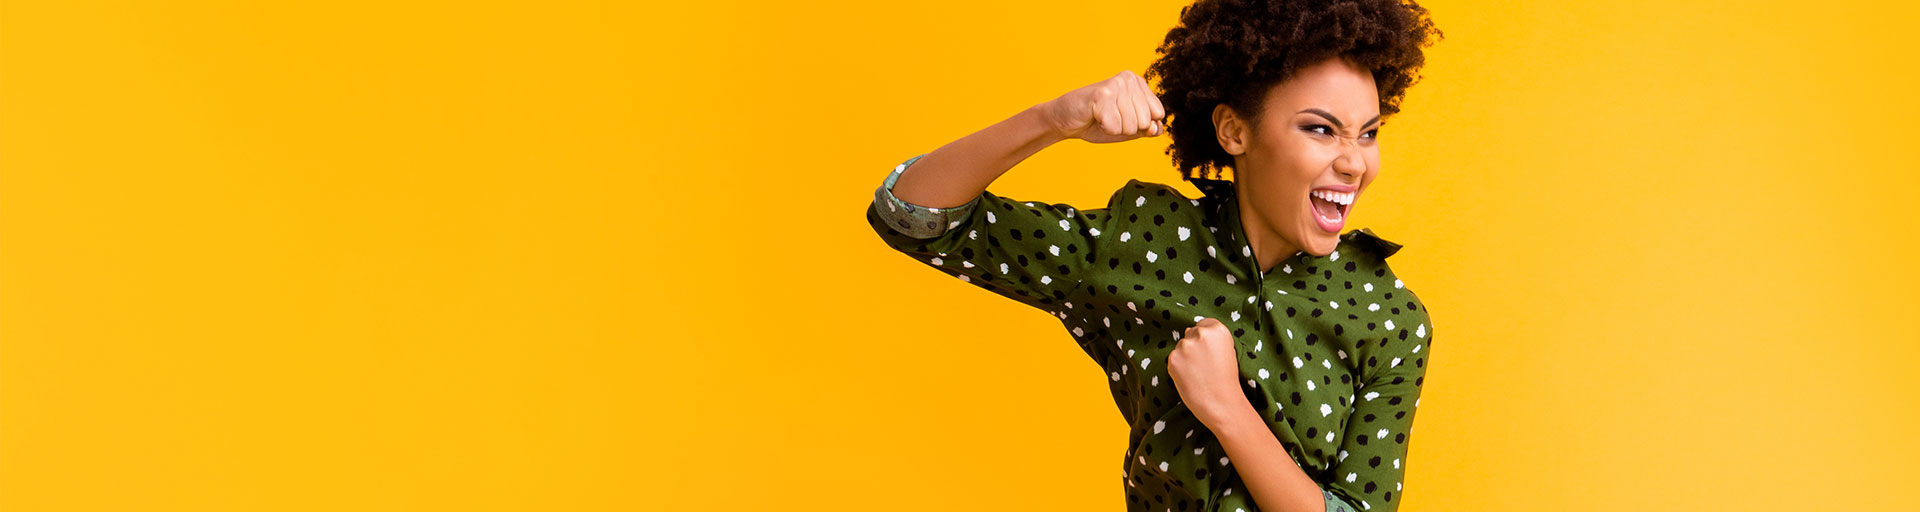 woman in the air doing a sideways kick on a bright yellow background